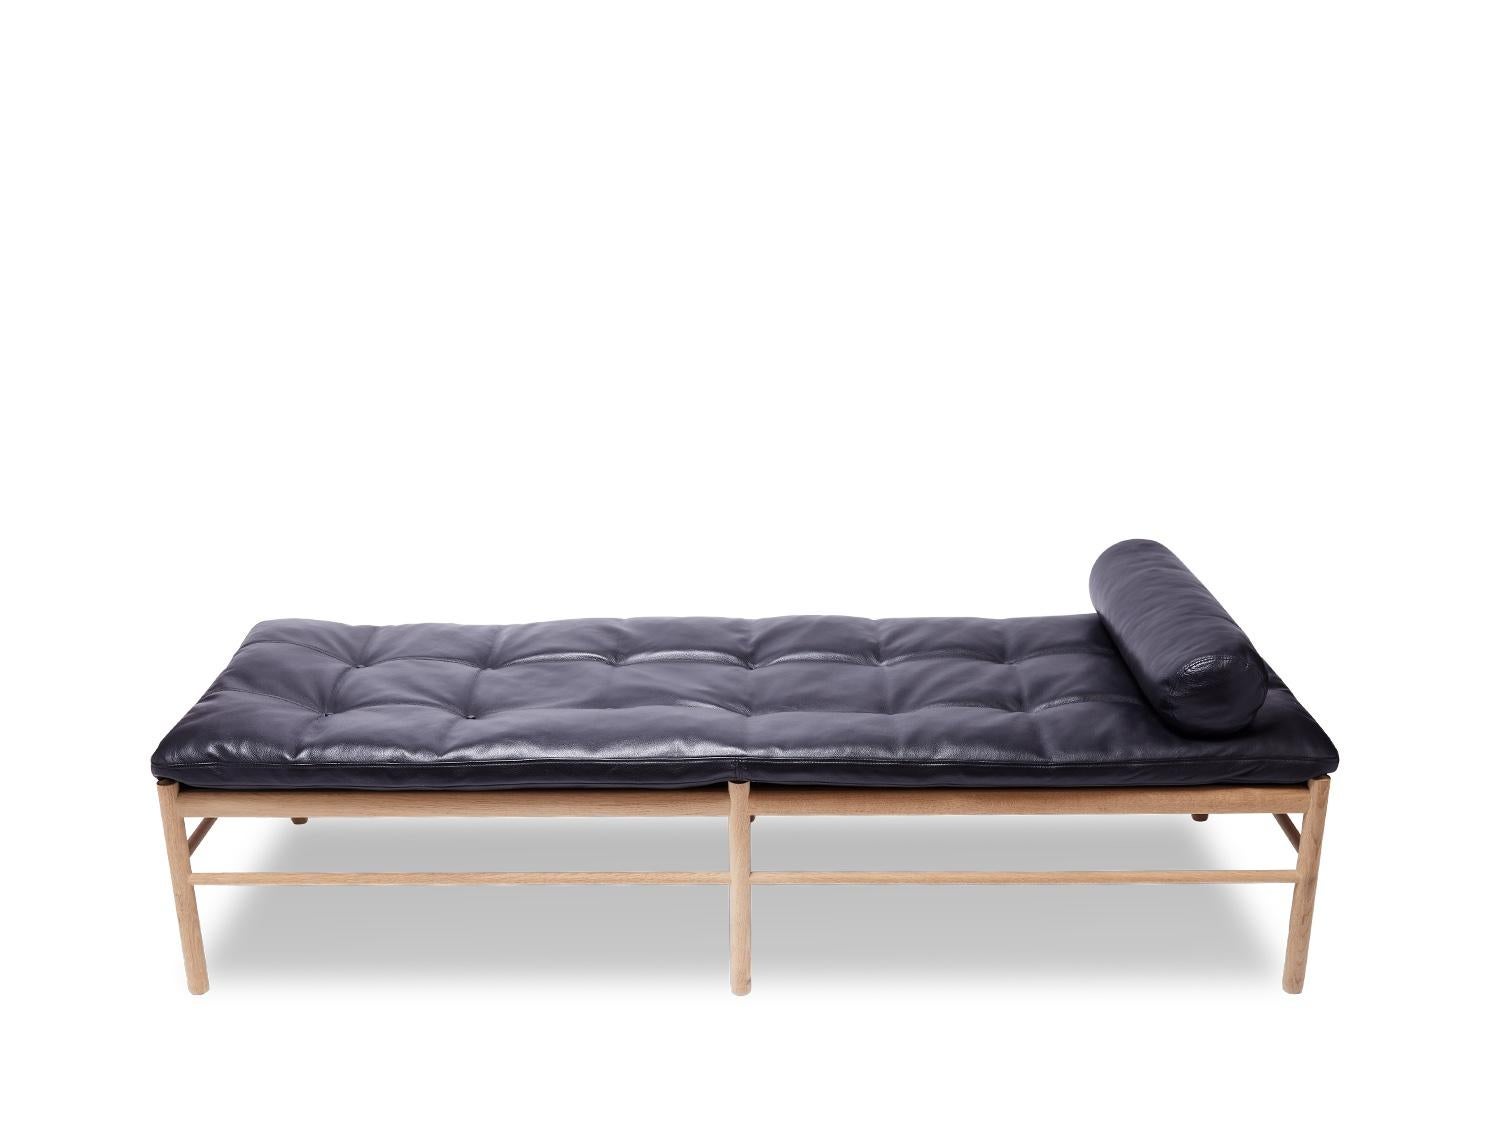 Description: Daybed of oak. Cushion and neckrest upholstered with black leather. Bottom/seat stretched with black cotton girths. Model OW 150. Manufactured by Carl Hansen & Søn
Designer: Ole Wanscher
Dimensions: 71